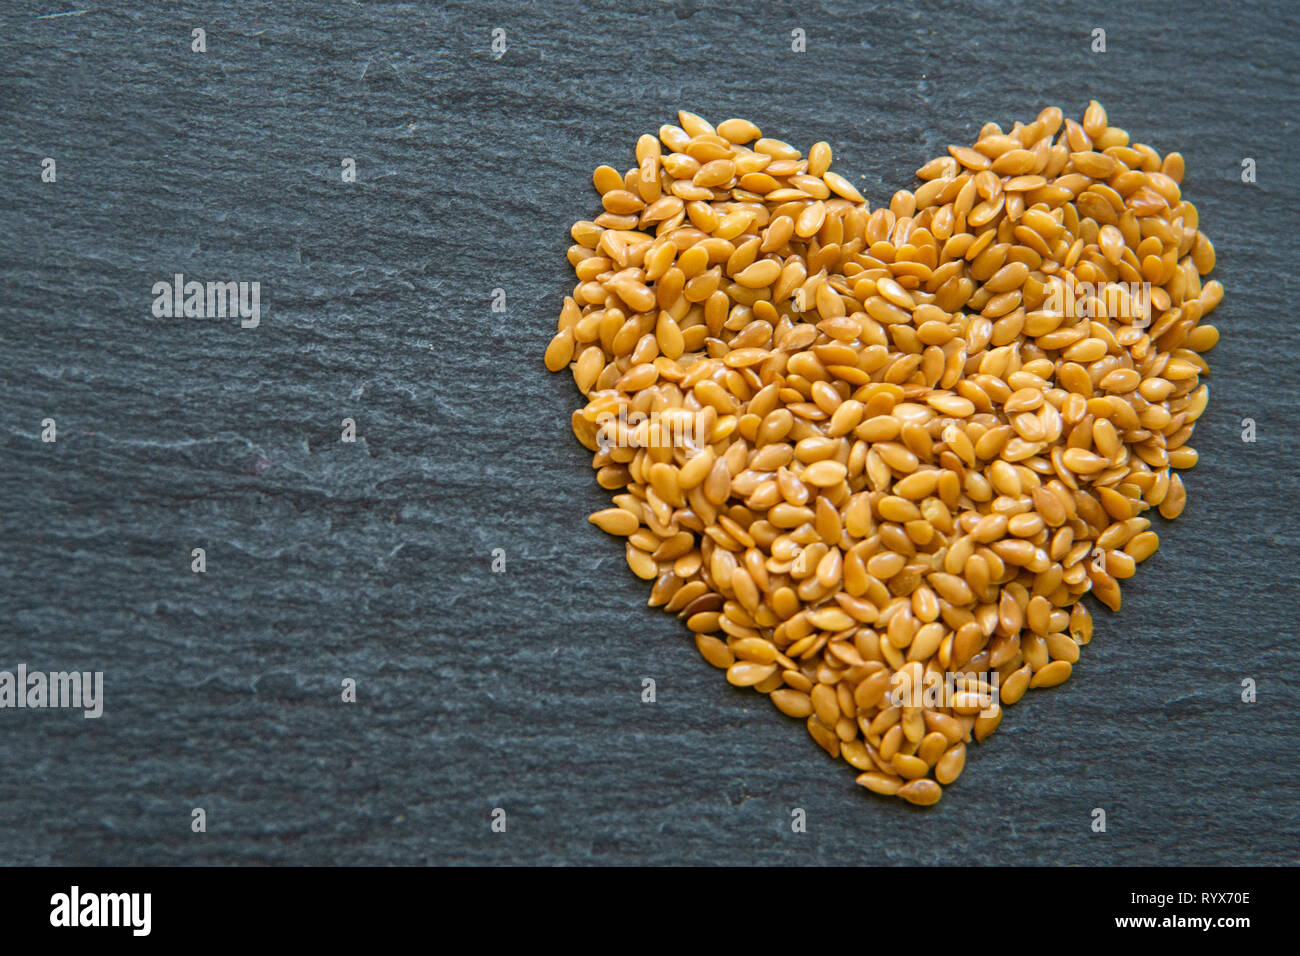 close up of flax seeds in a heart shape on a dark slate background Stock Photo